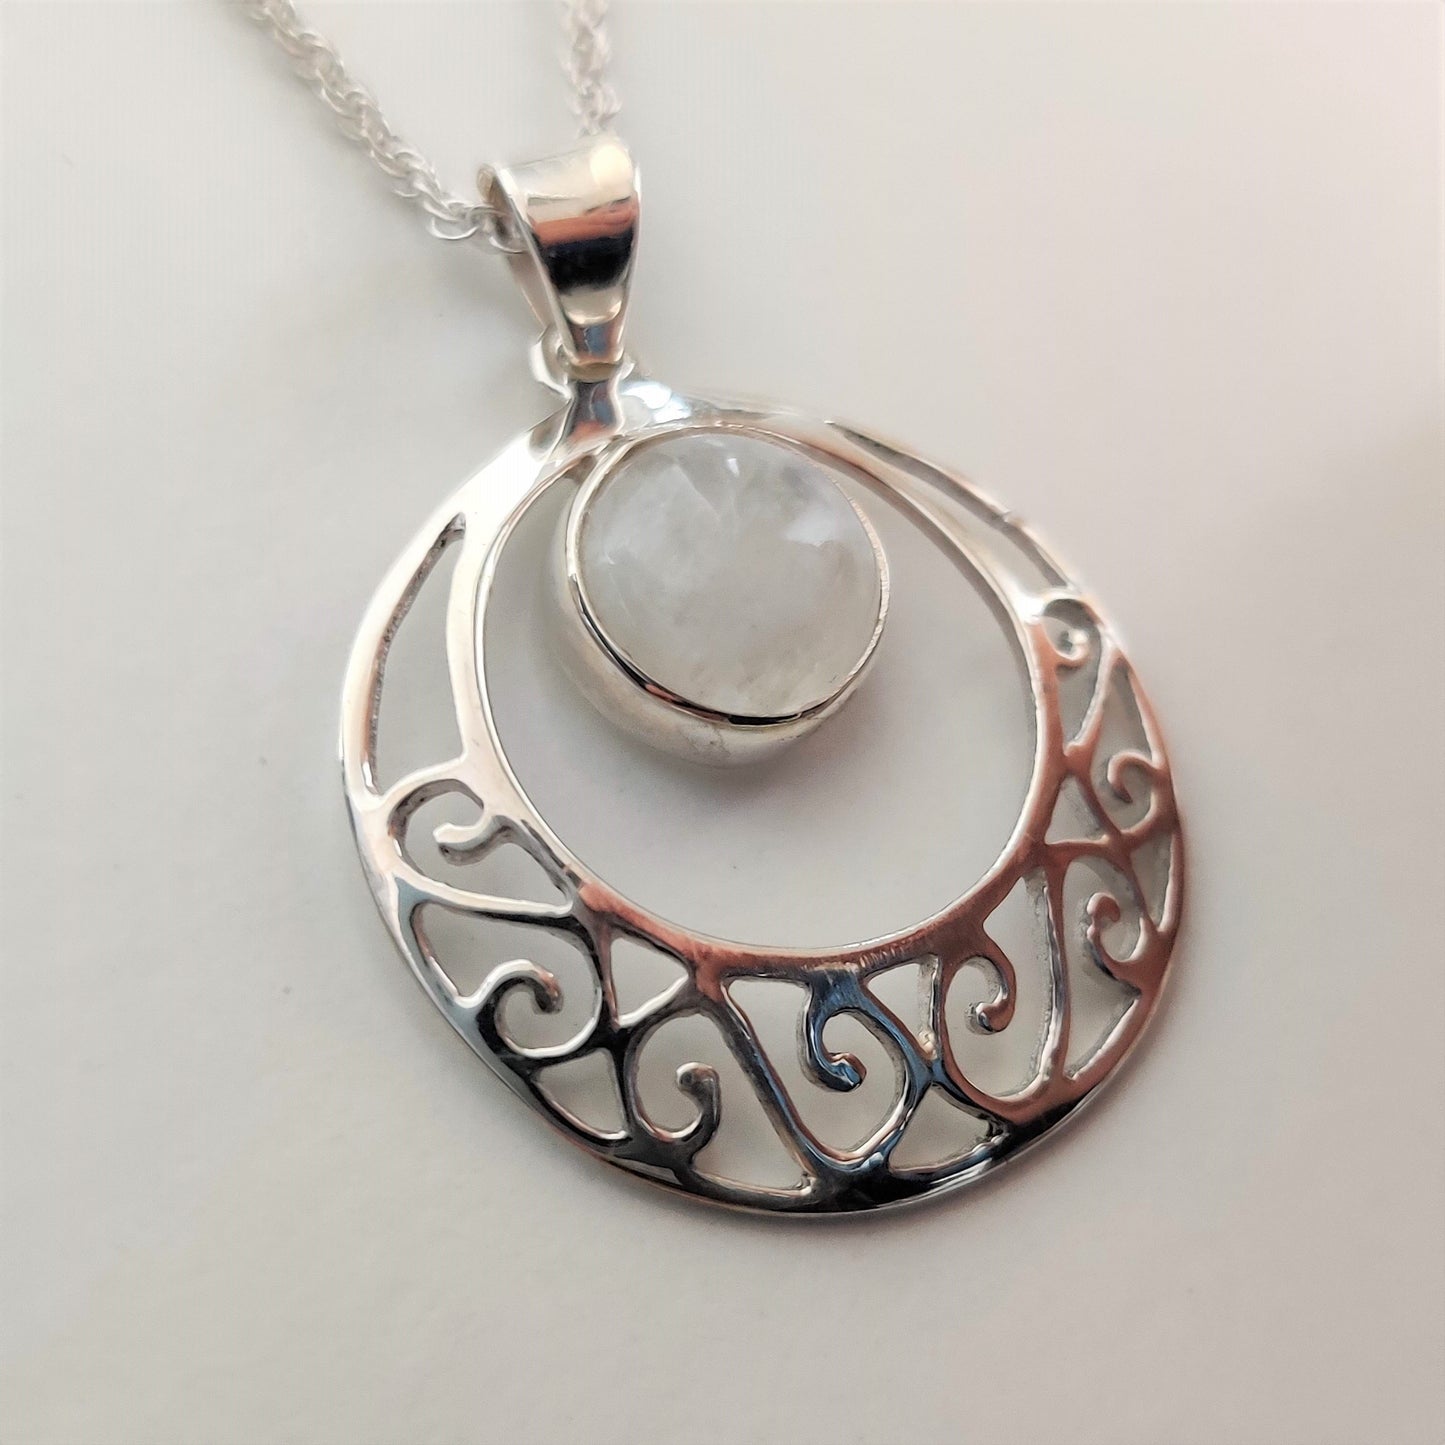 Moonstone with Crescent 925 Sterling Silver Pendant - Rivendell Shop